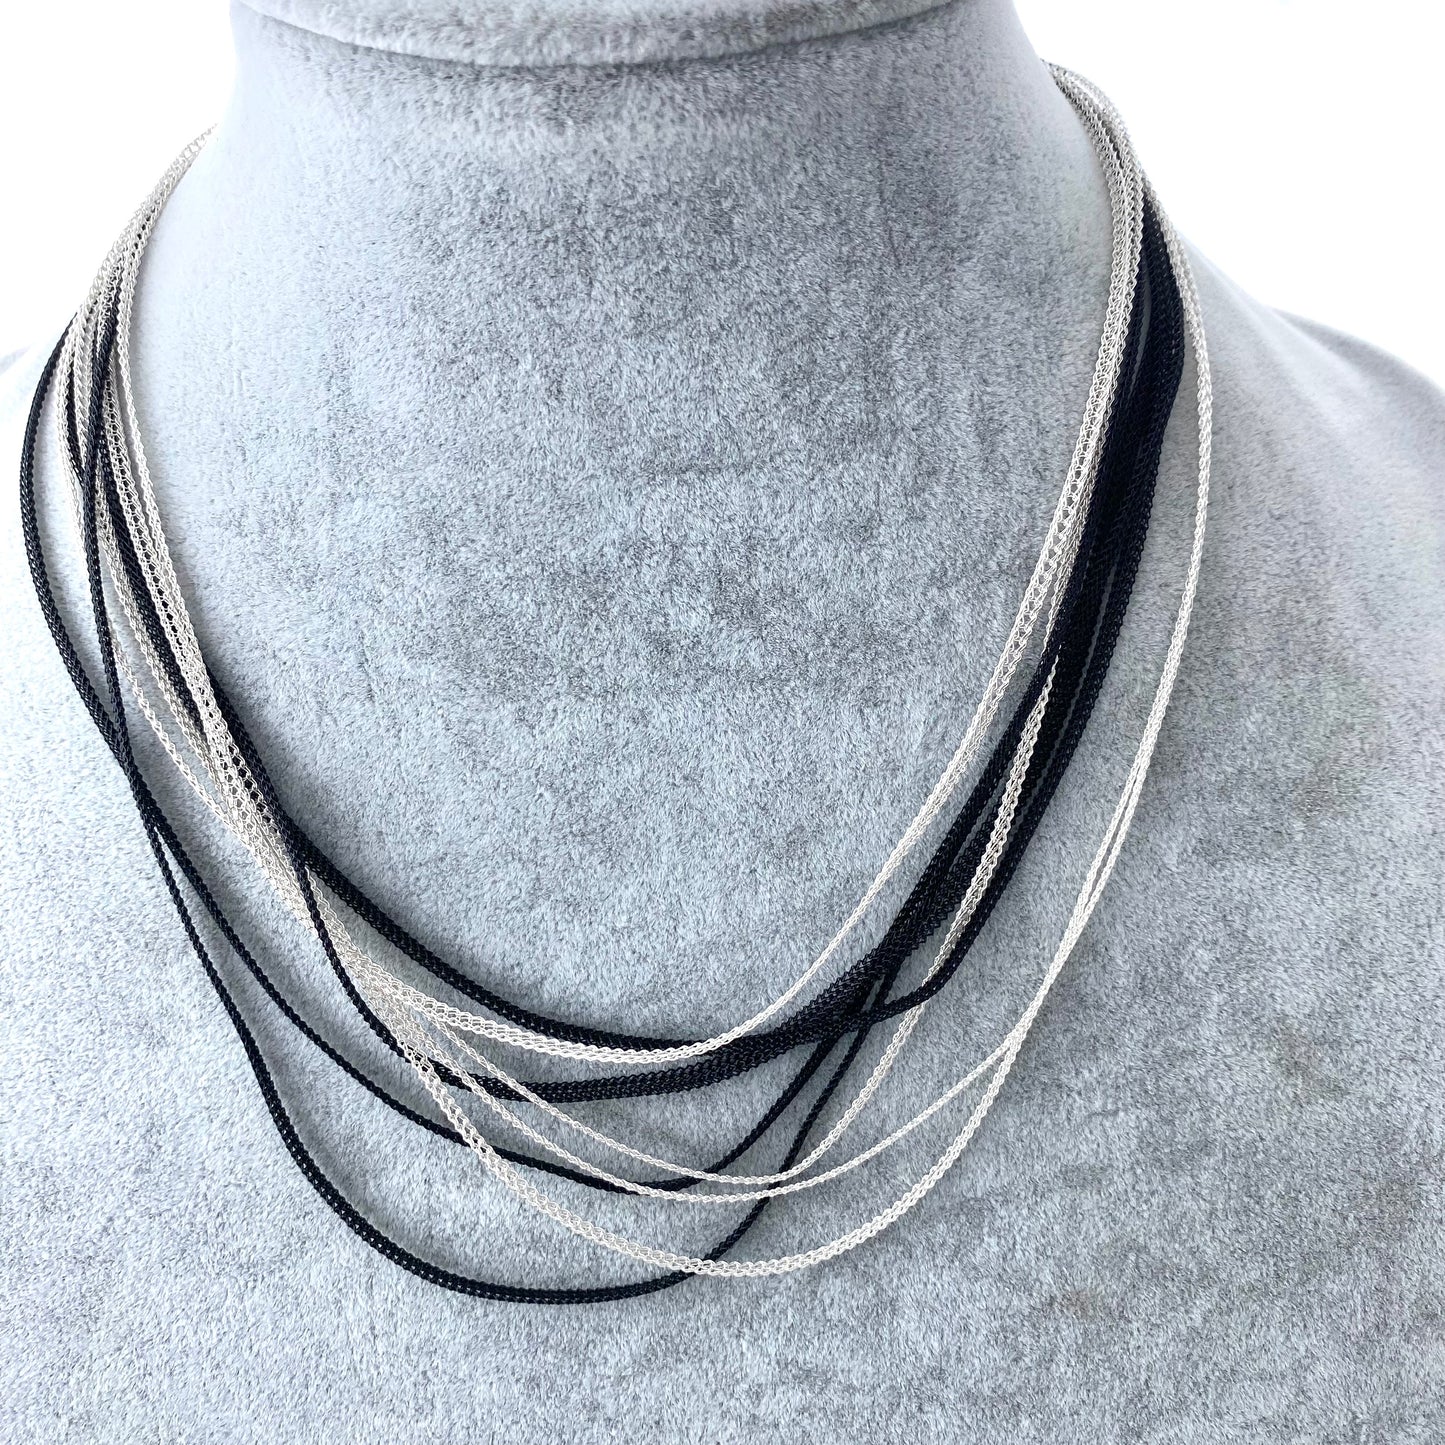 Black and Silver Knit Necklace